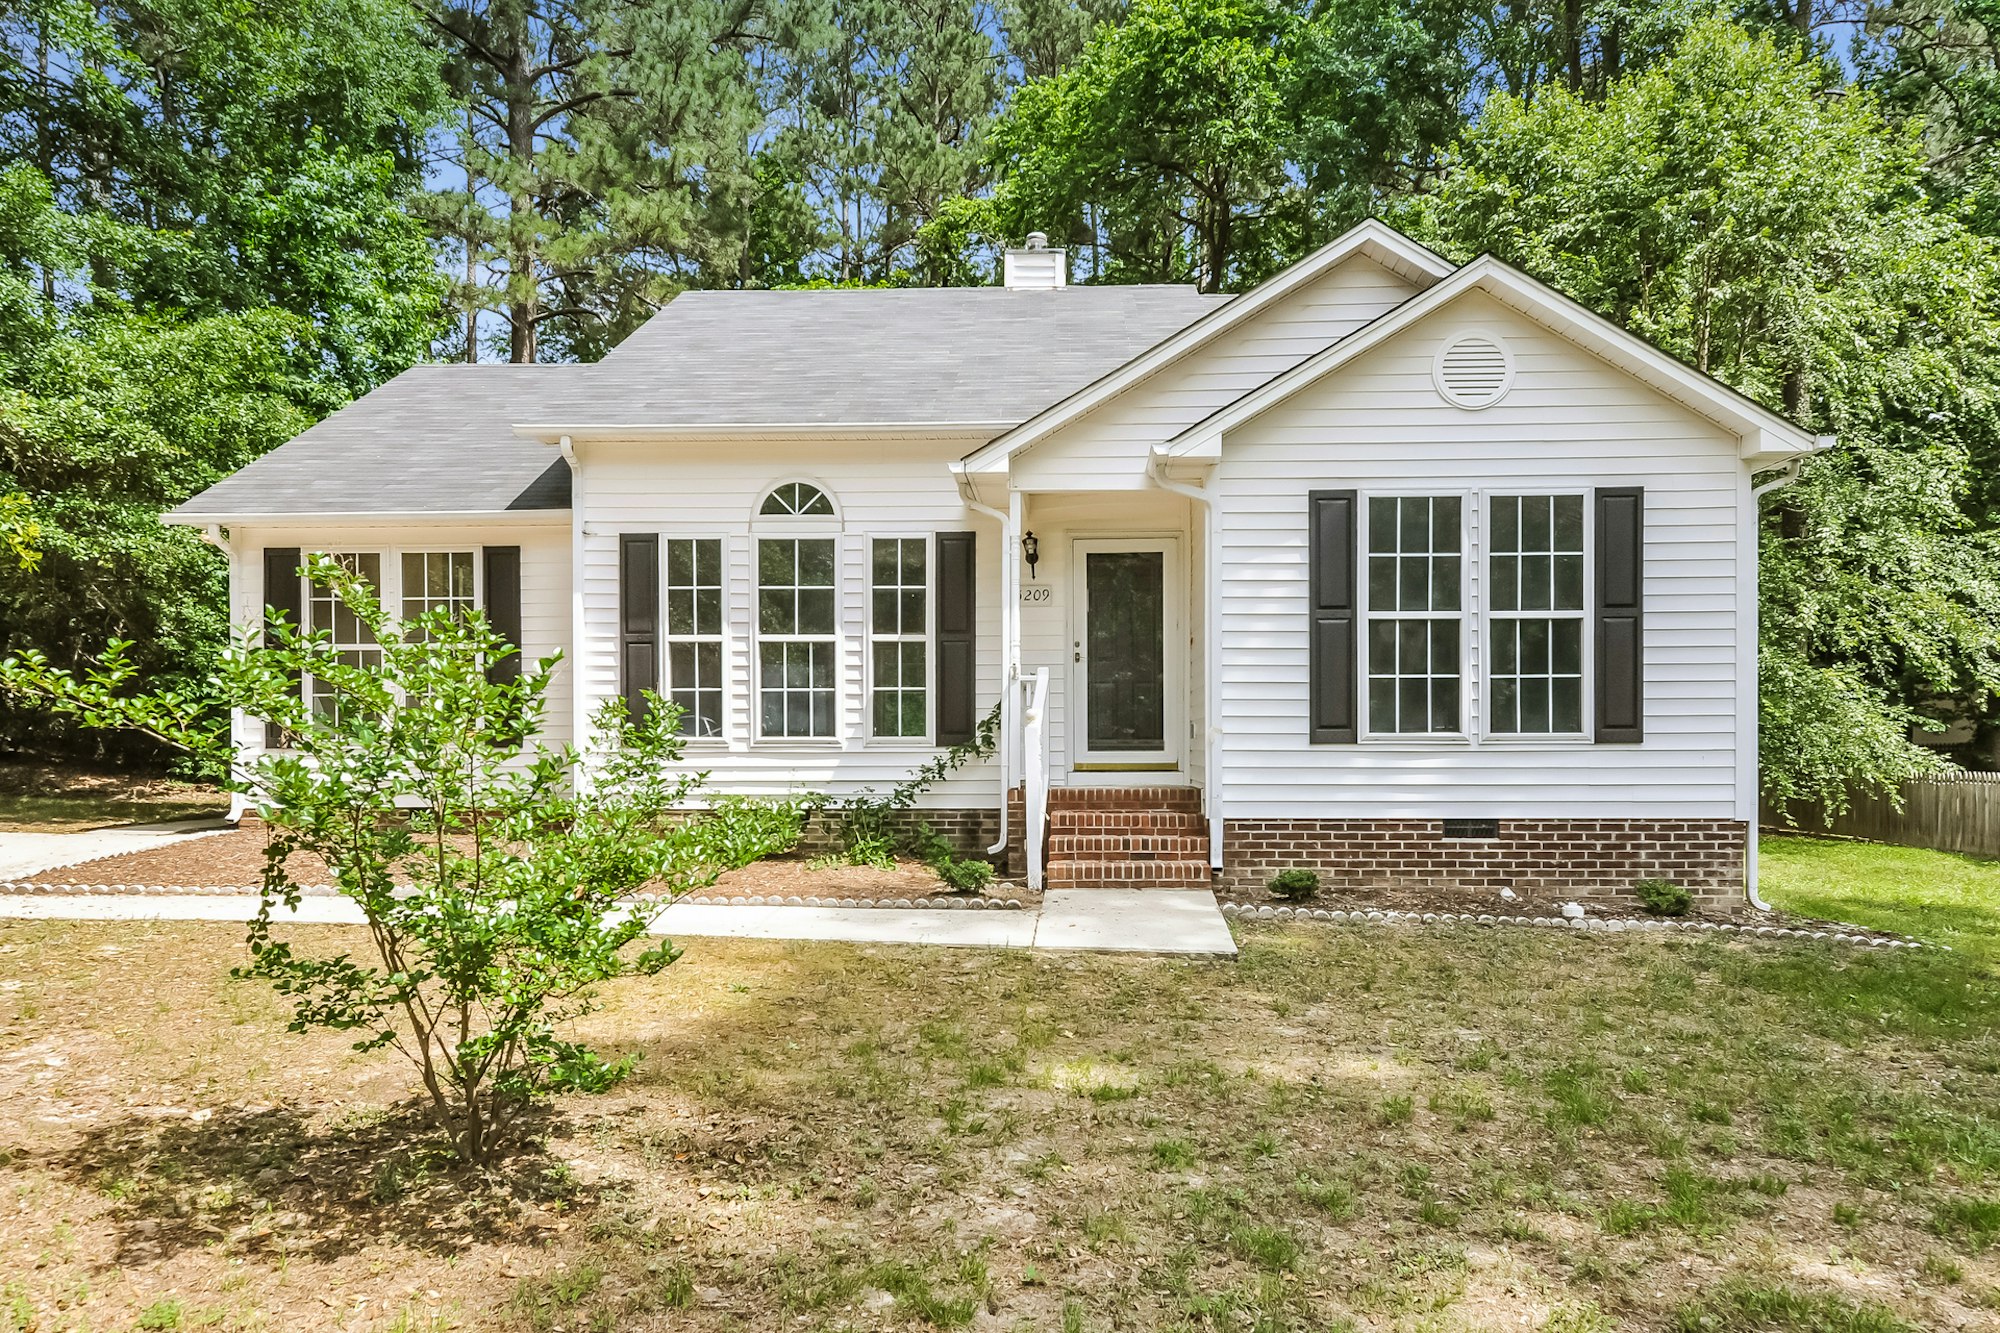 Photo 1 of 25 - 5209 Pronghorn Ln, Raleigh, NC 27610